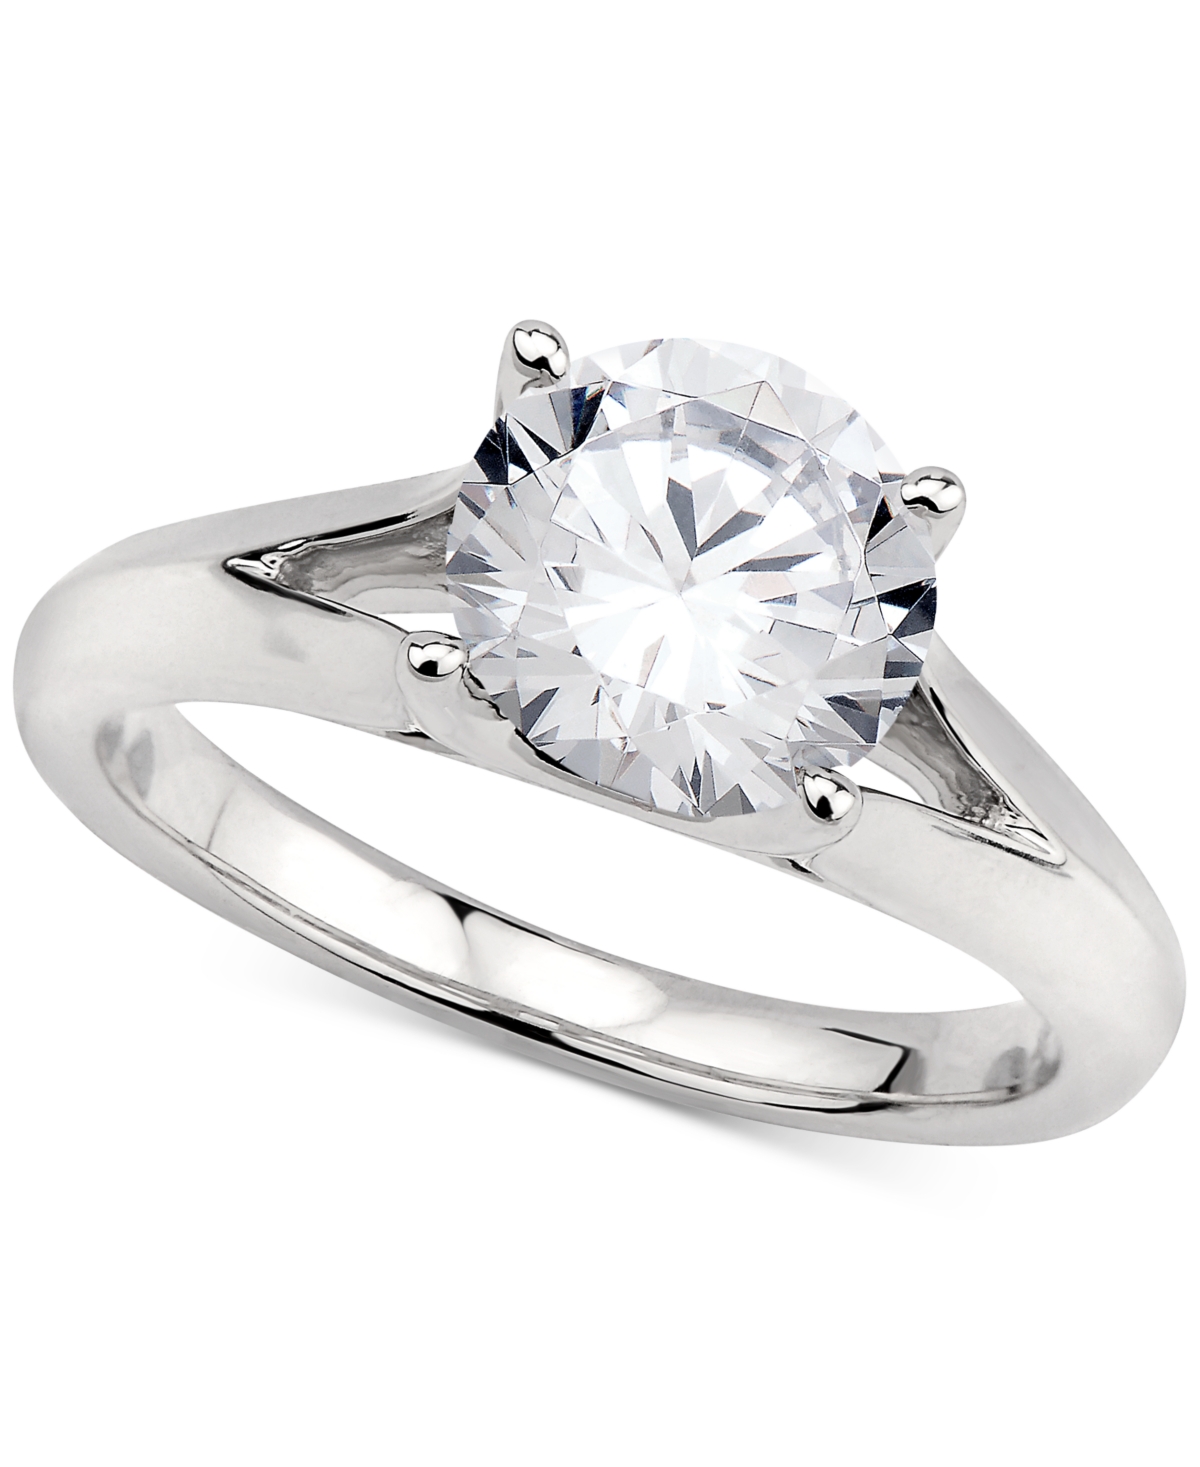 Gia Certified Diamond Solitaire Engagement Ring (2 ct. t.w.) in 14k White Gold - White Gold